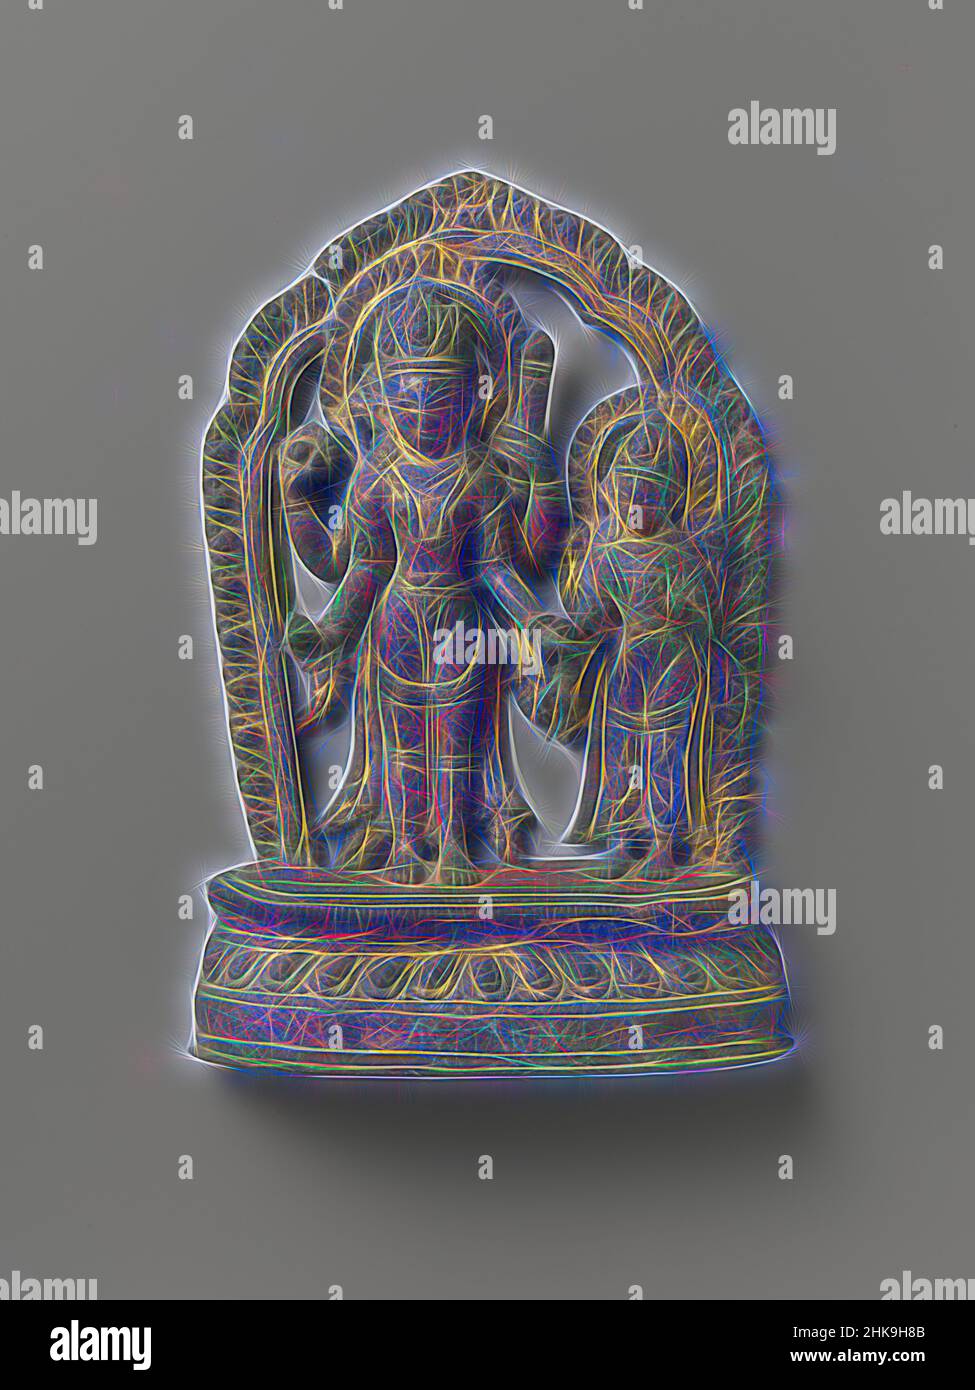 Inspired by Image of the god couple Vishnu and Shri, Image of the god couple Vishnu and Shri. Surrounded by a halo, the two deities stand on a lotus base. Vishnu has four arms with a throwing disc and conch shell in his right hands and a club and lotus in his left. The goddess has two arms; with the, Reimagined by Artotop. Classic art reinvented with a modern twist. Design of warm cheerful glowing of brightness and light ray radiance. Photography inspired by surrealism and futurism, embracing dynamic energy of modern technology, movement, speed and revolutionize culture Stock Photo